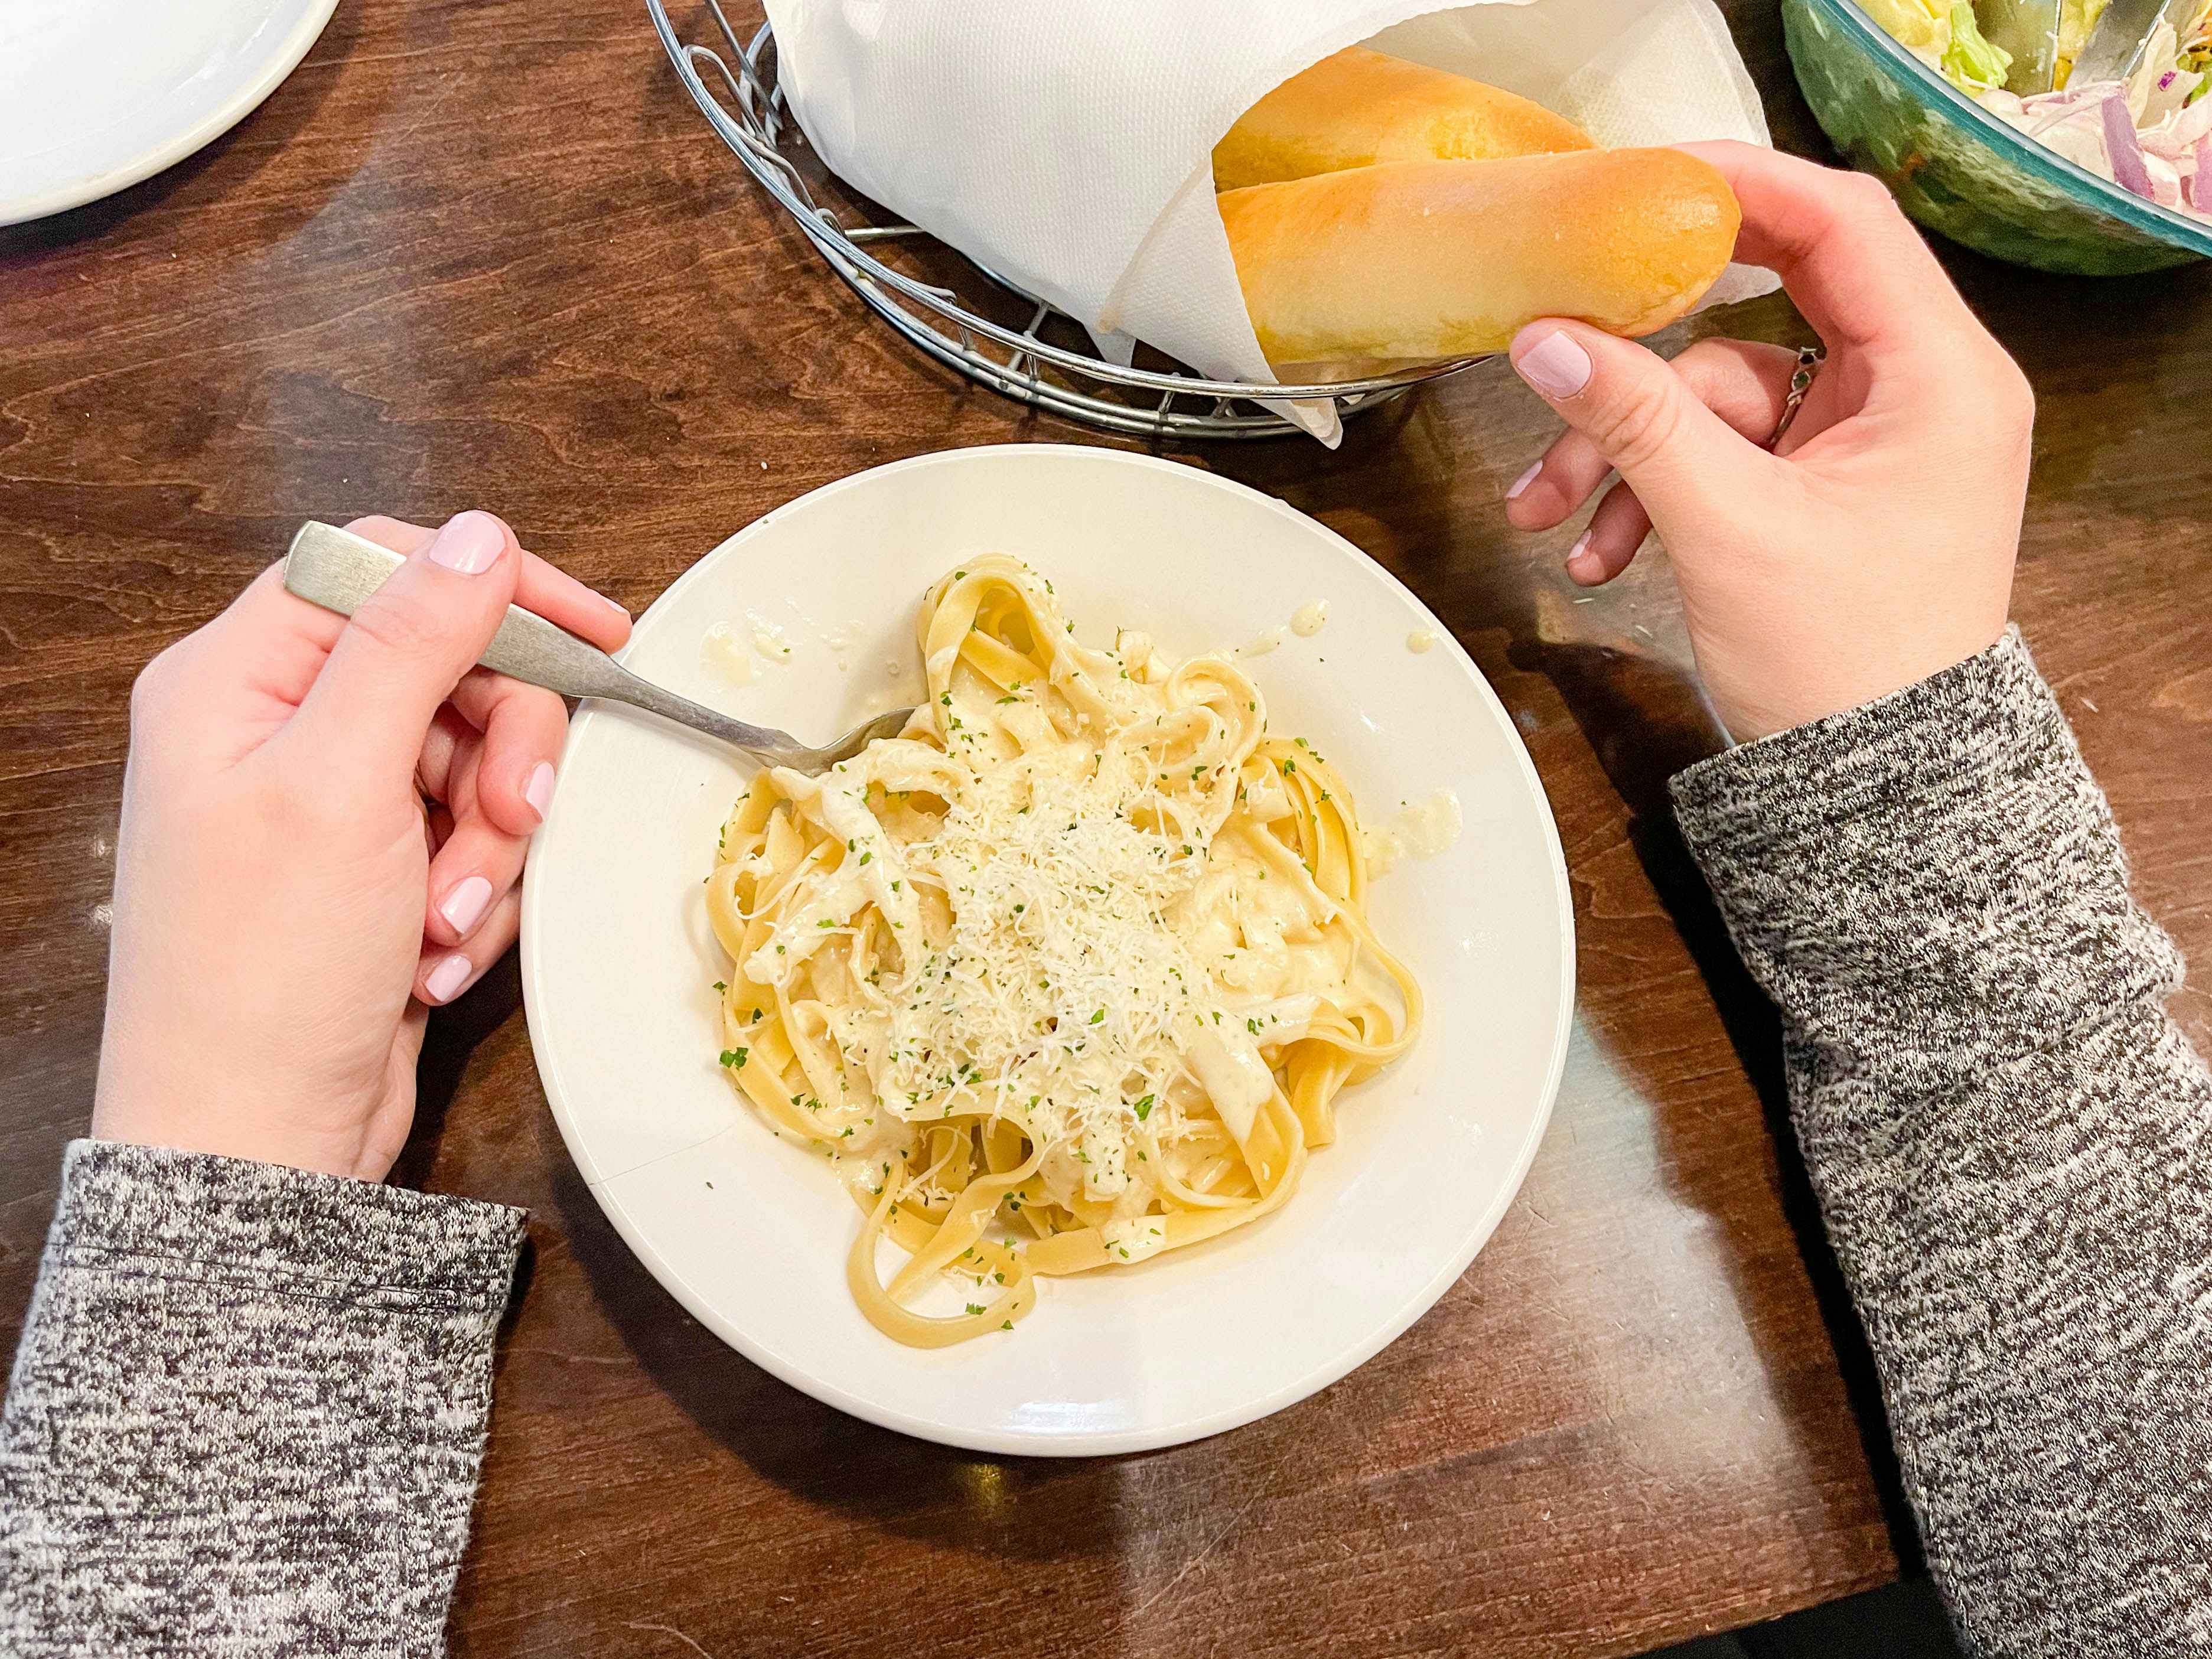 A person sitting at a table at Olive Garden, taking a breadstick from the bread basket and putting a fork into a bowl of pasta.